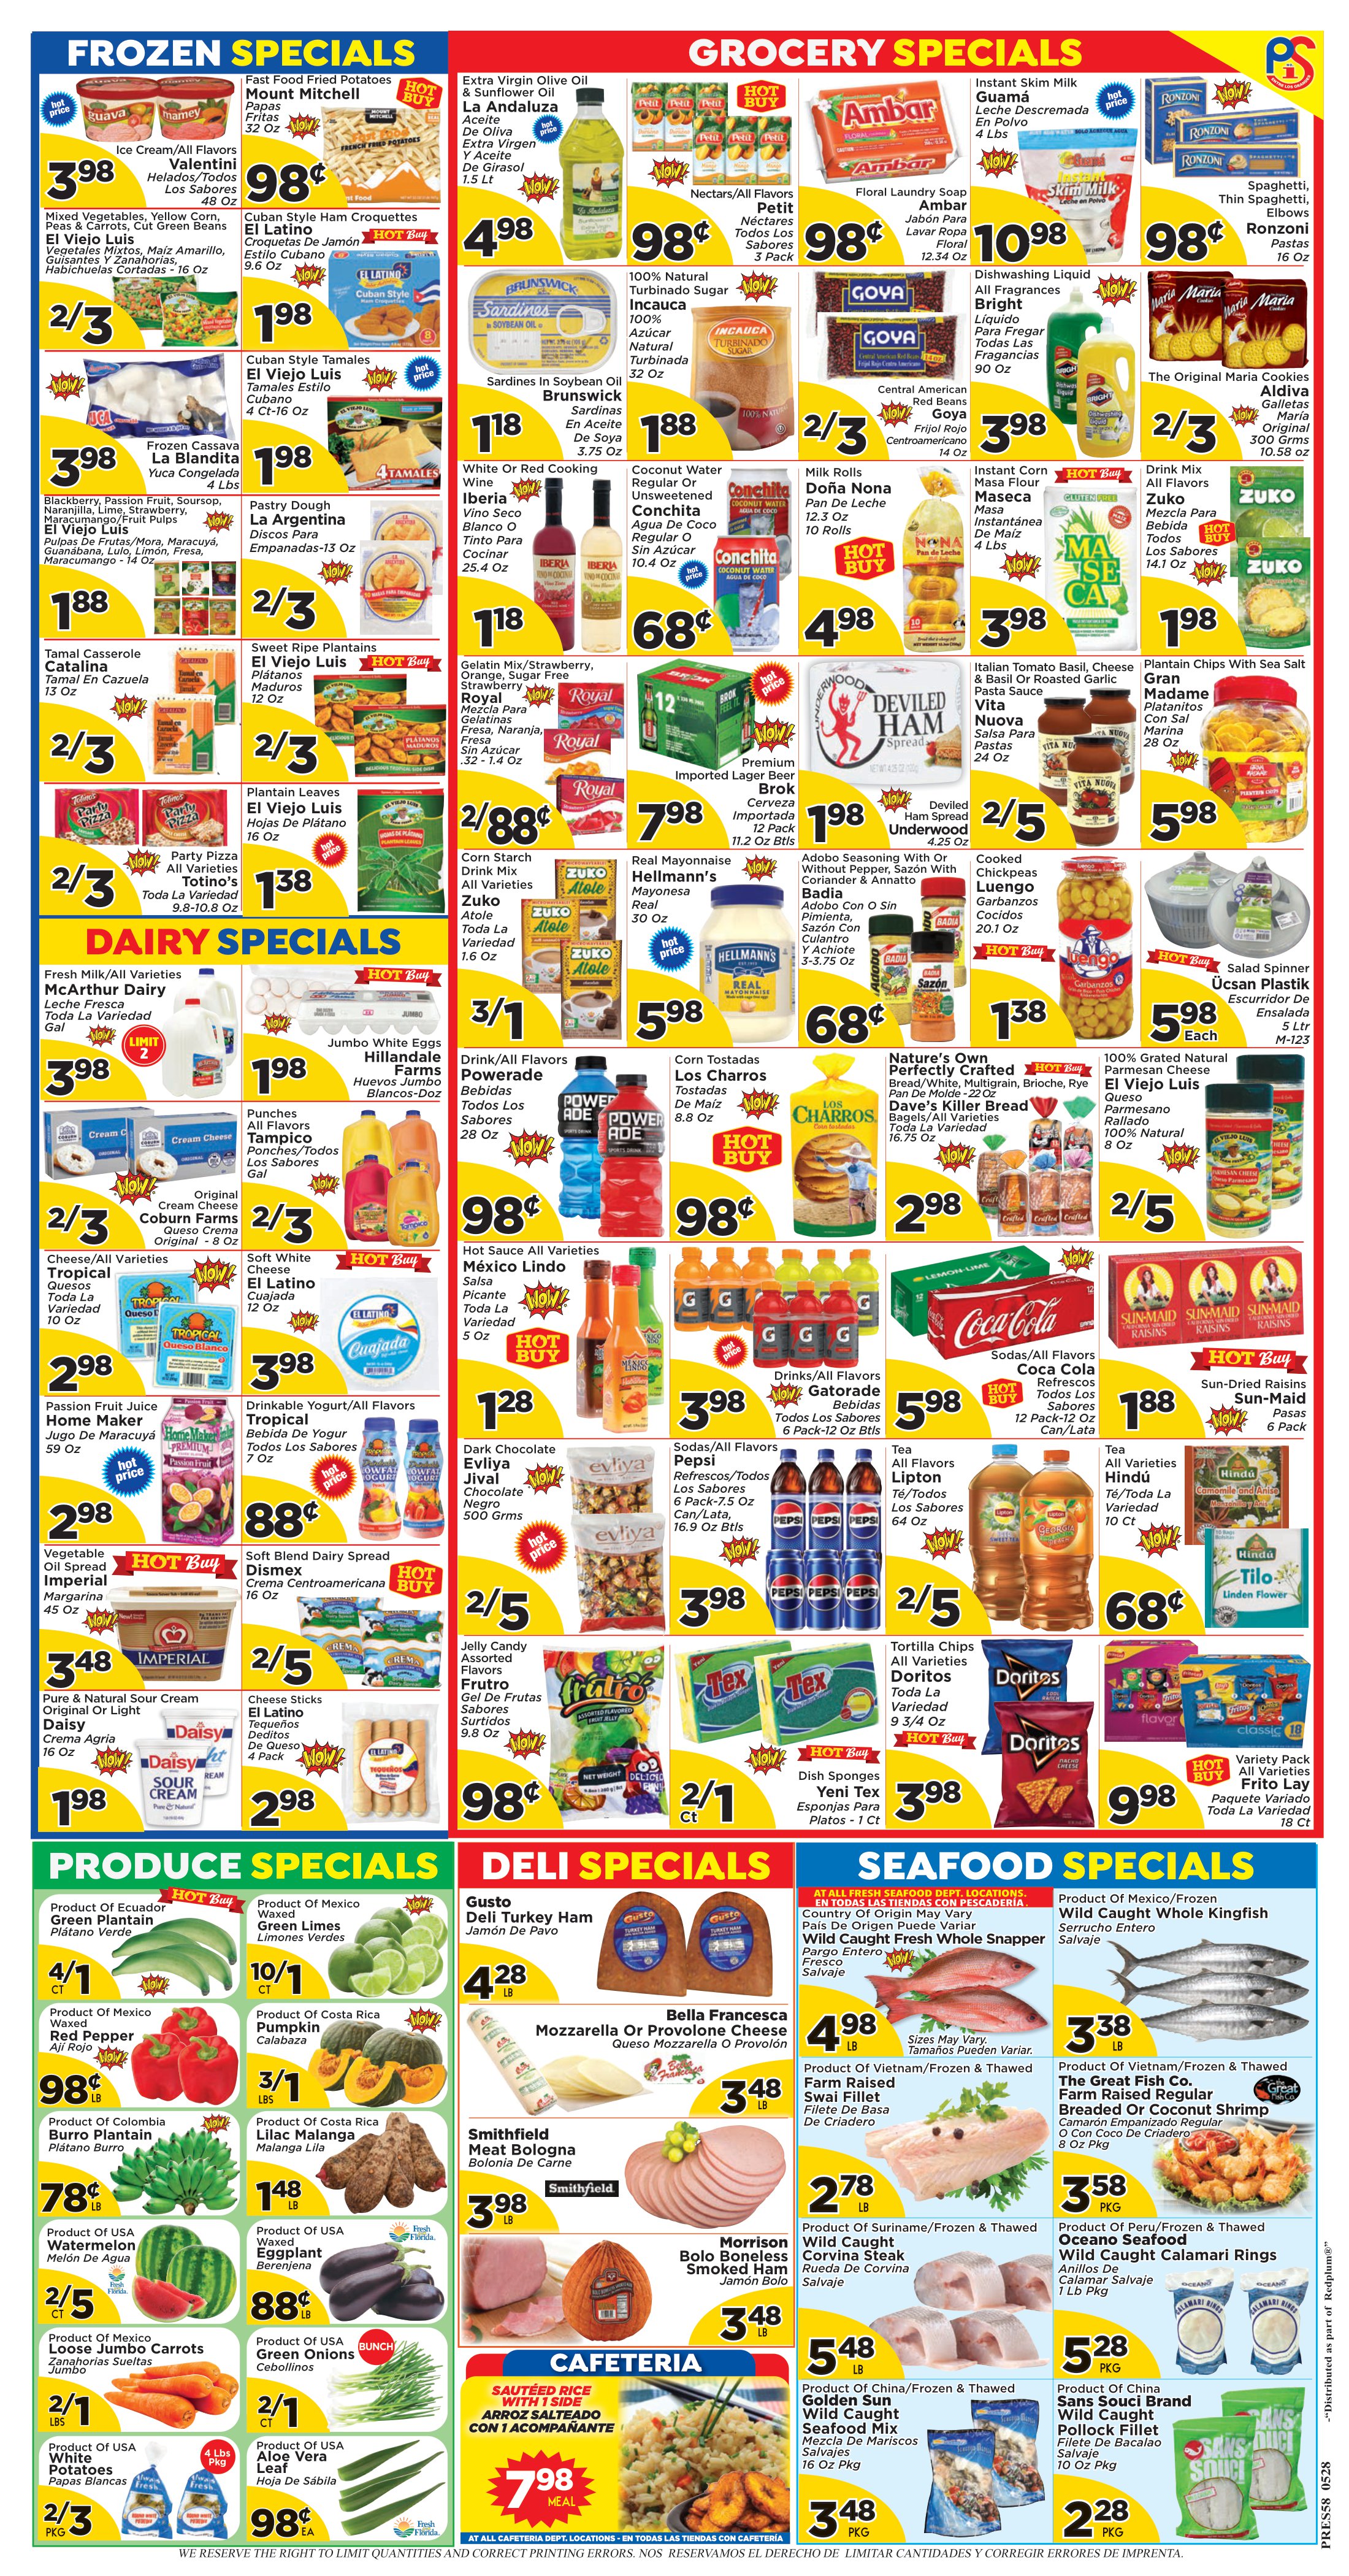 Presidente Supermarket - Weekly Promo for Store 58 - Page 2